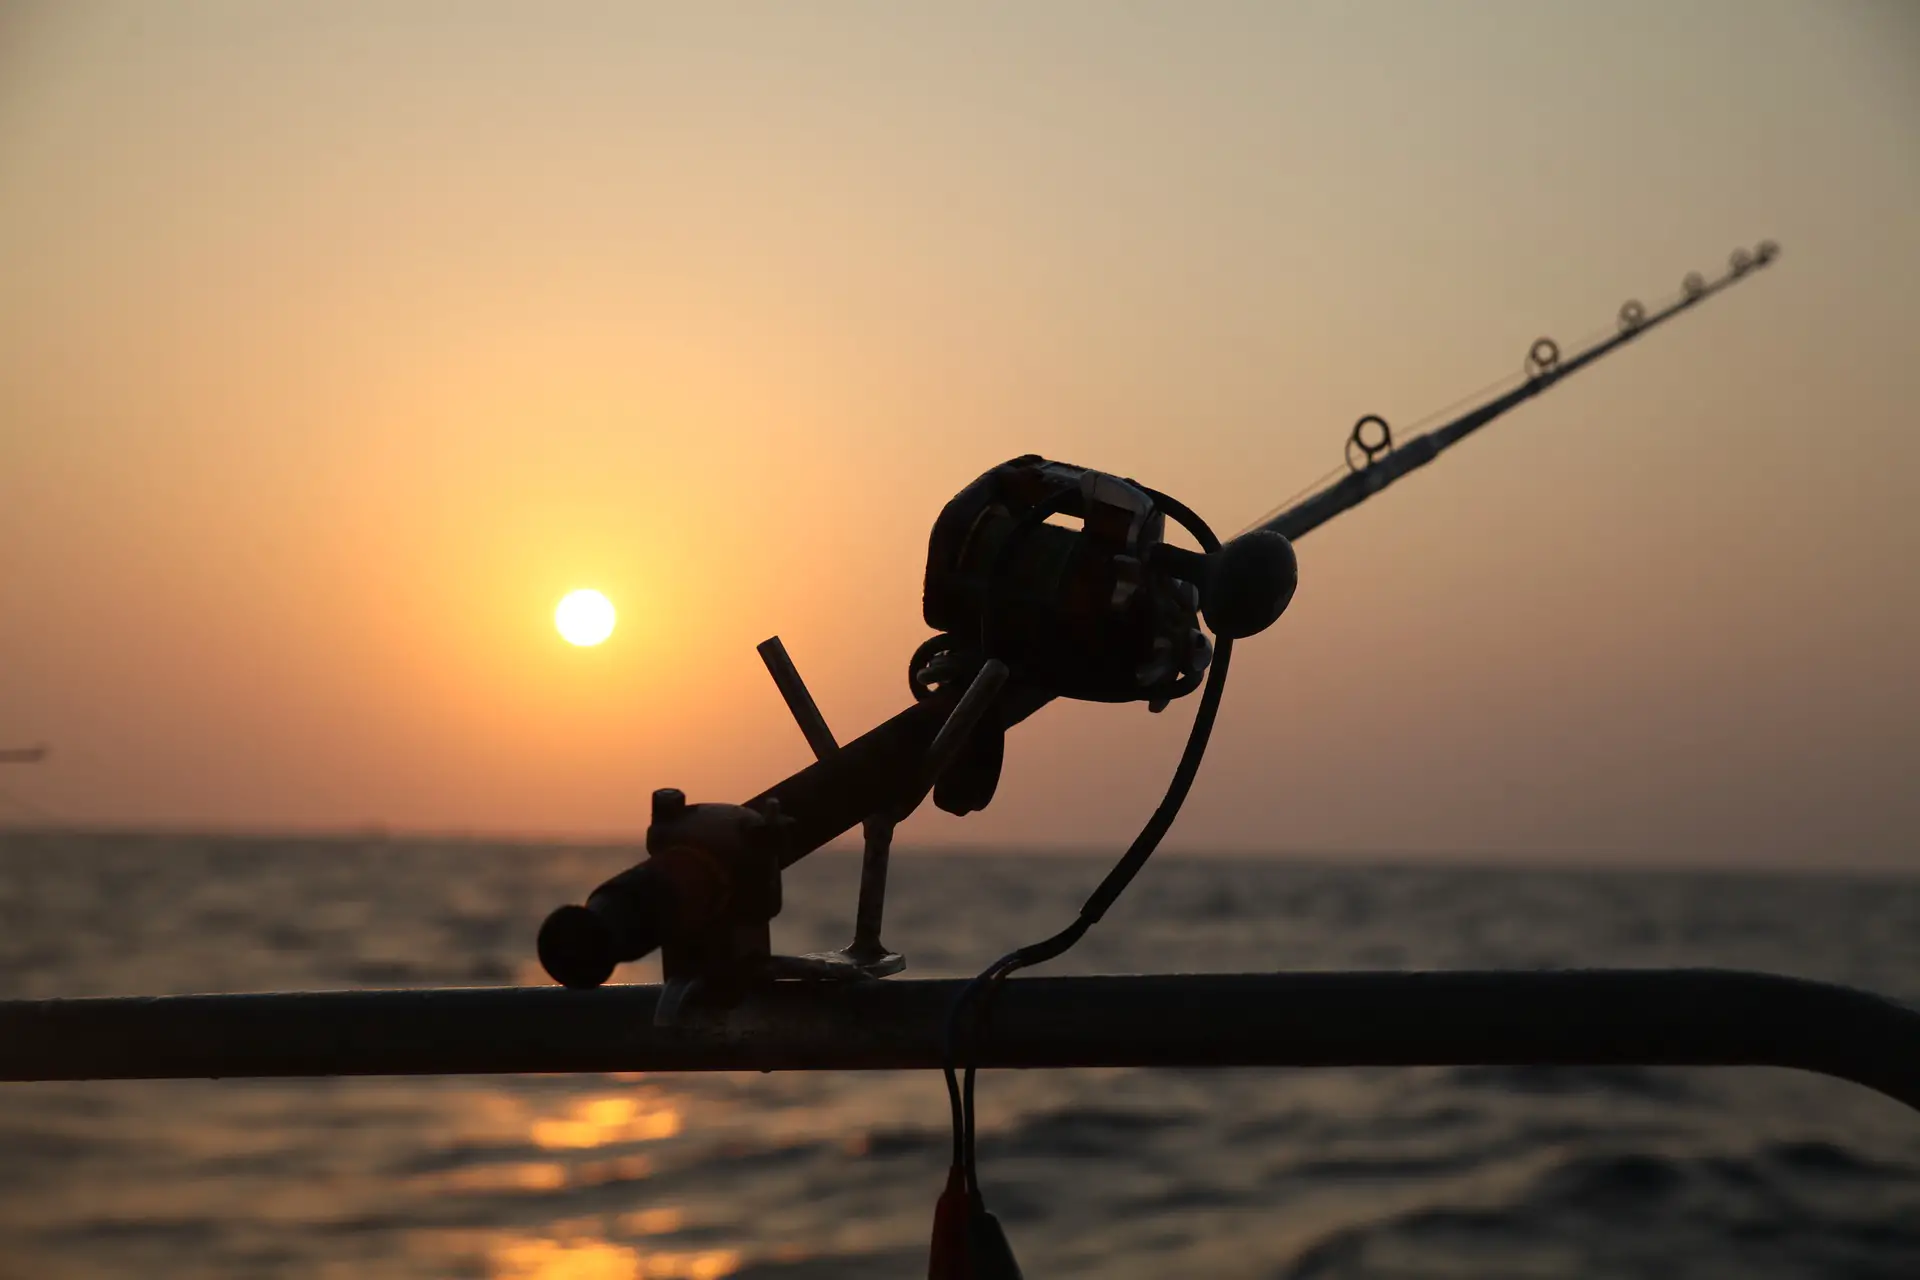 A fishing reel mounted to the railing of a boat